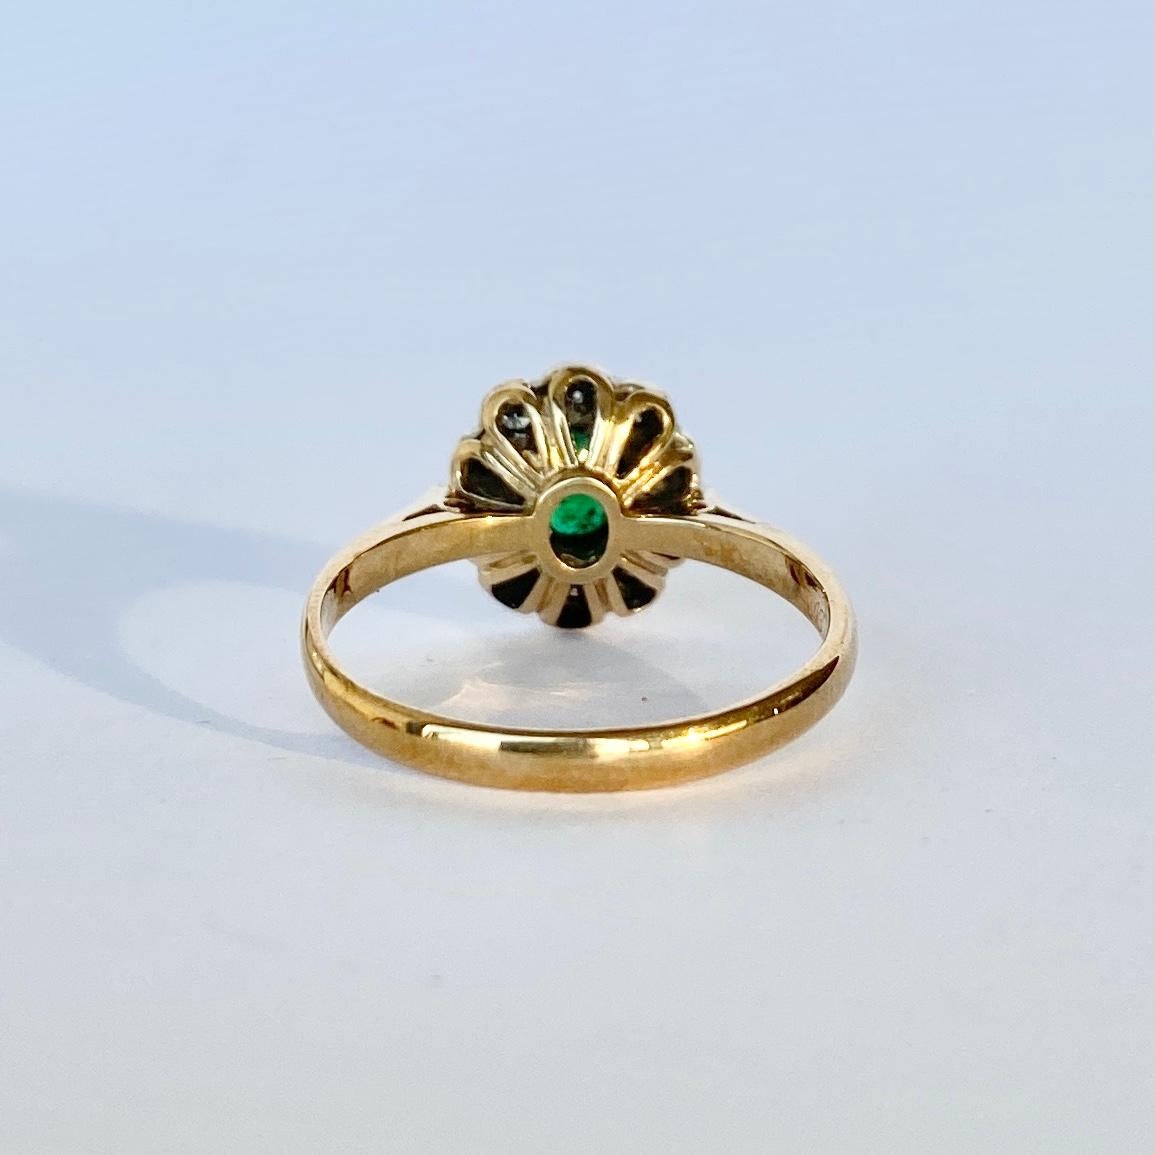 Cluster rings are so wearable and timeless. This particular cluster holds a deep gorgeous emerald at the centre and is encircled within a fabulous halo of diamonds. The emerald measures 30pts and the diamonds total 20pts. The stones are set in